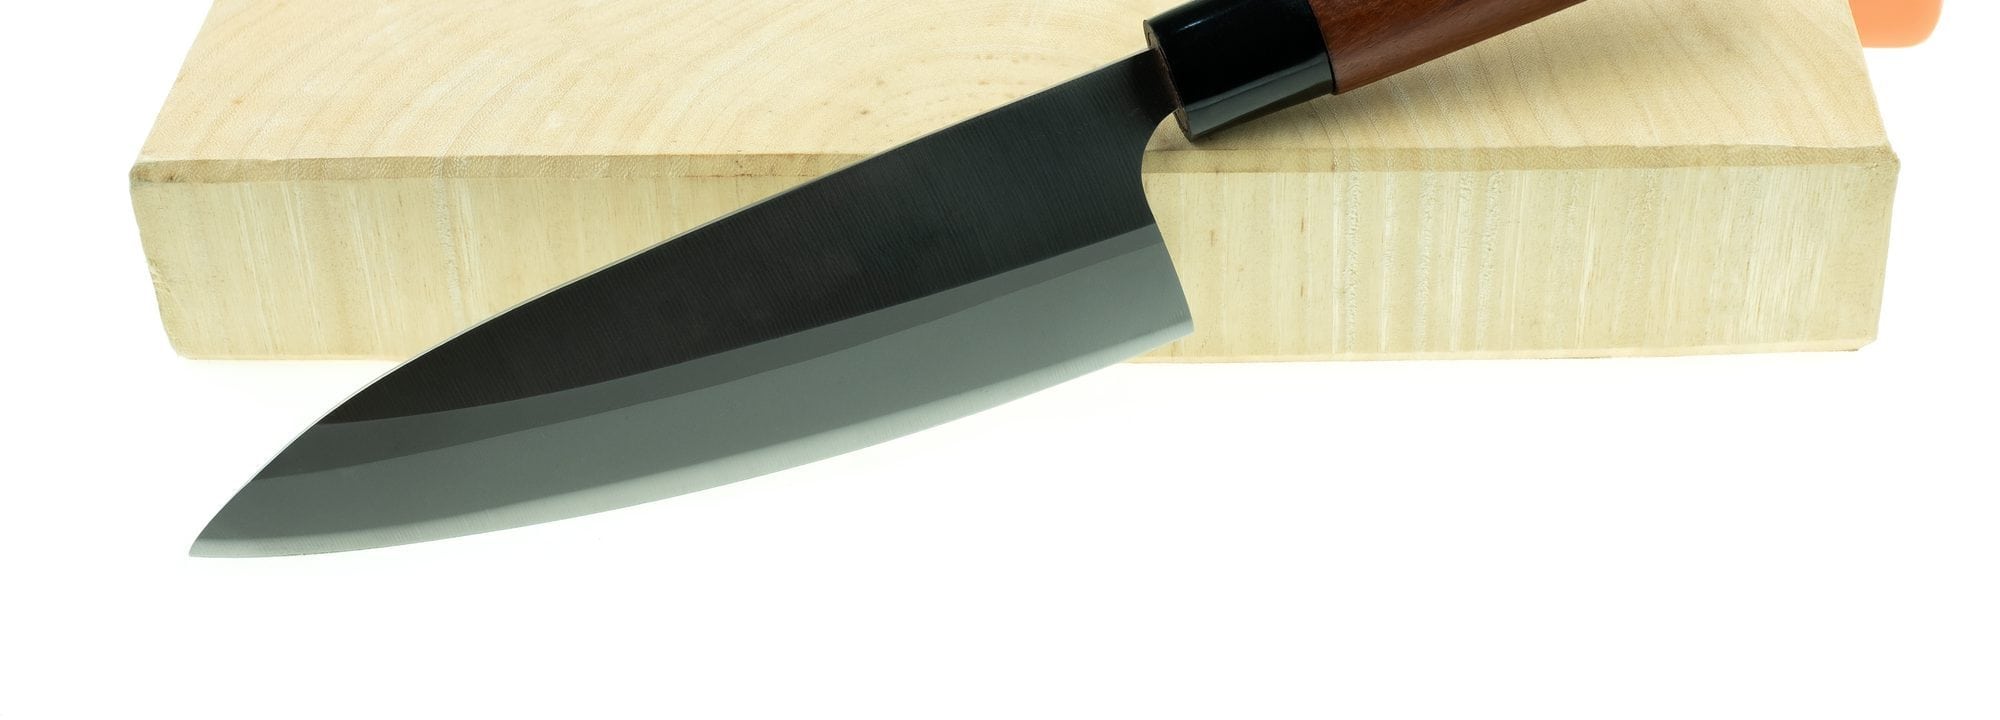 kitchen knife and wood butcher block countertop